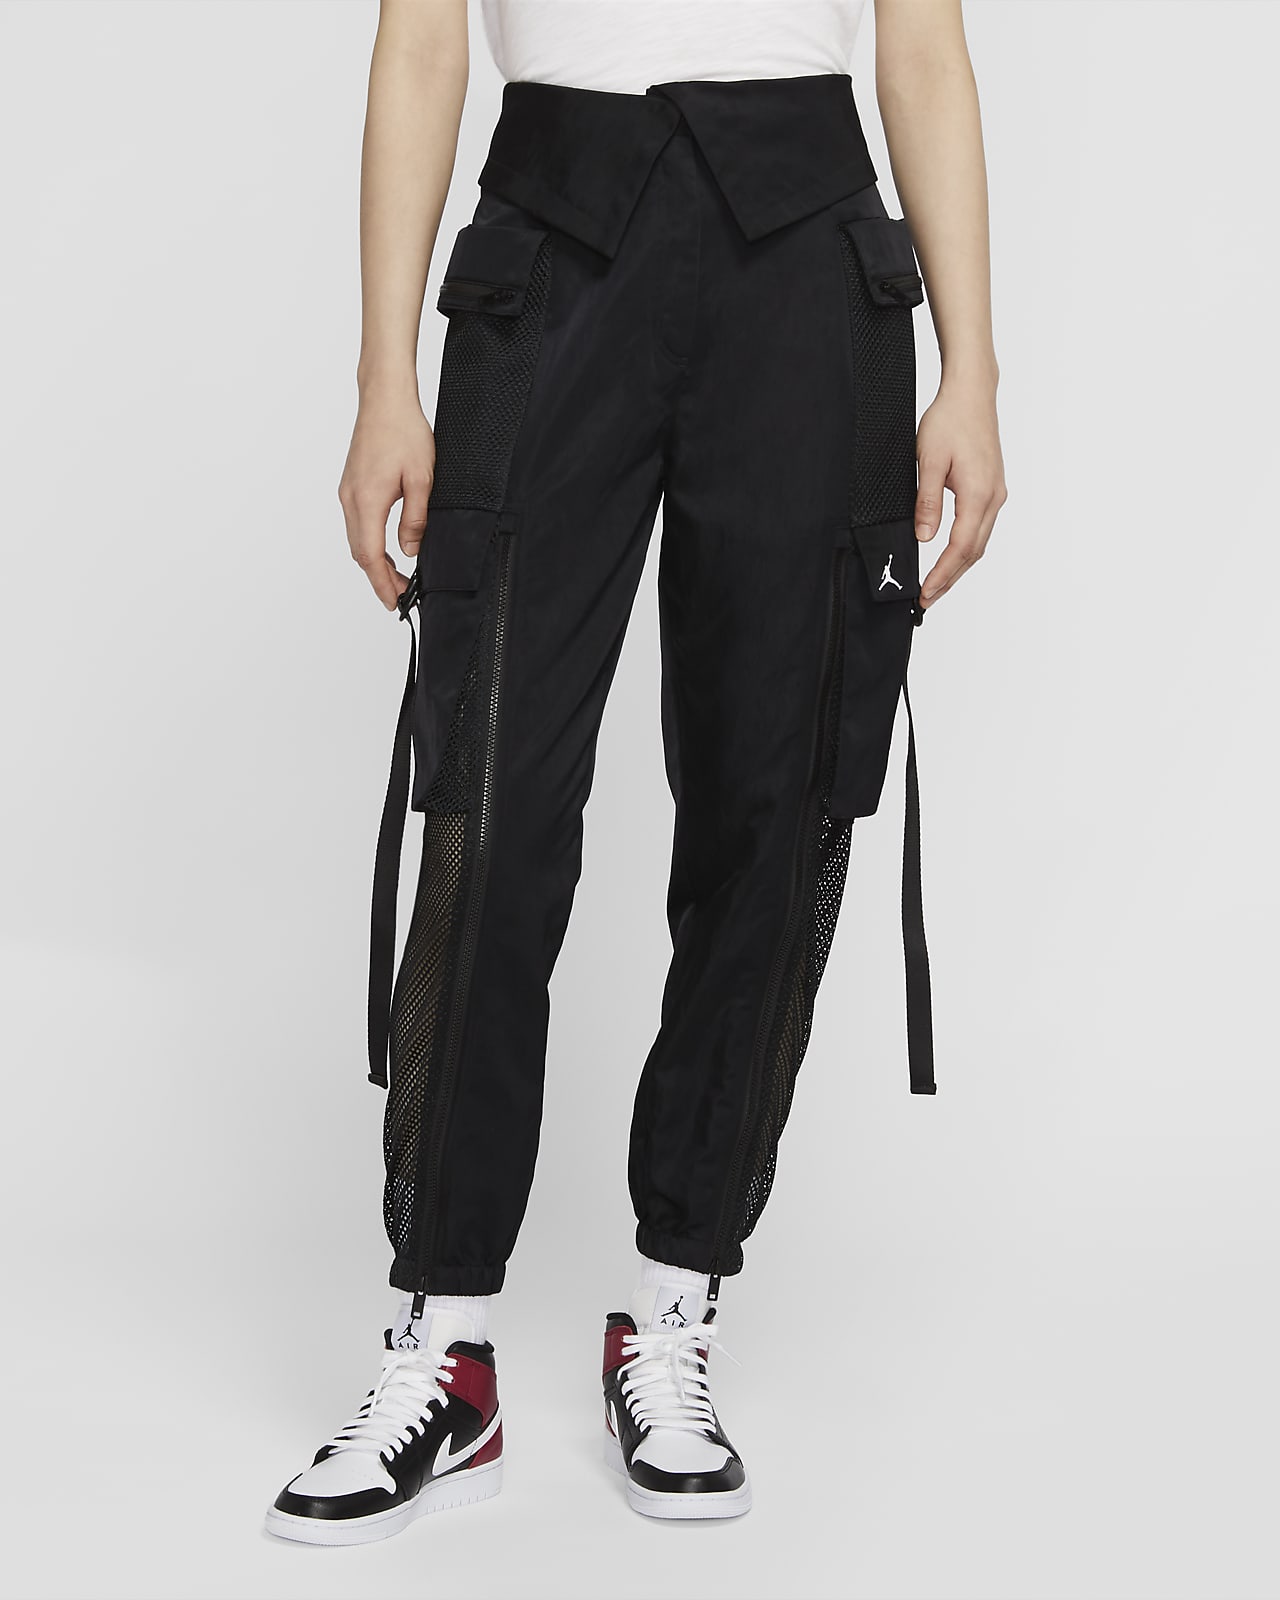 women's utility pants with pockets